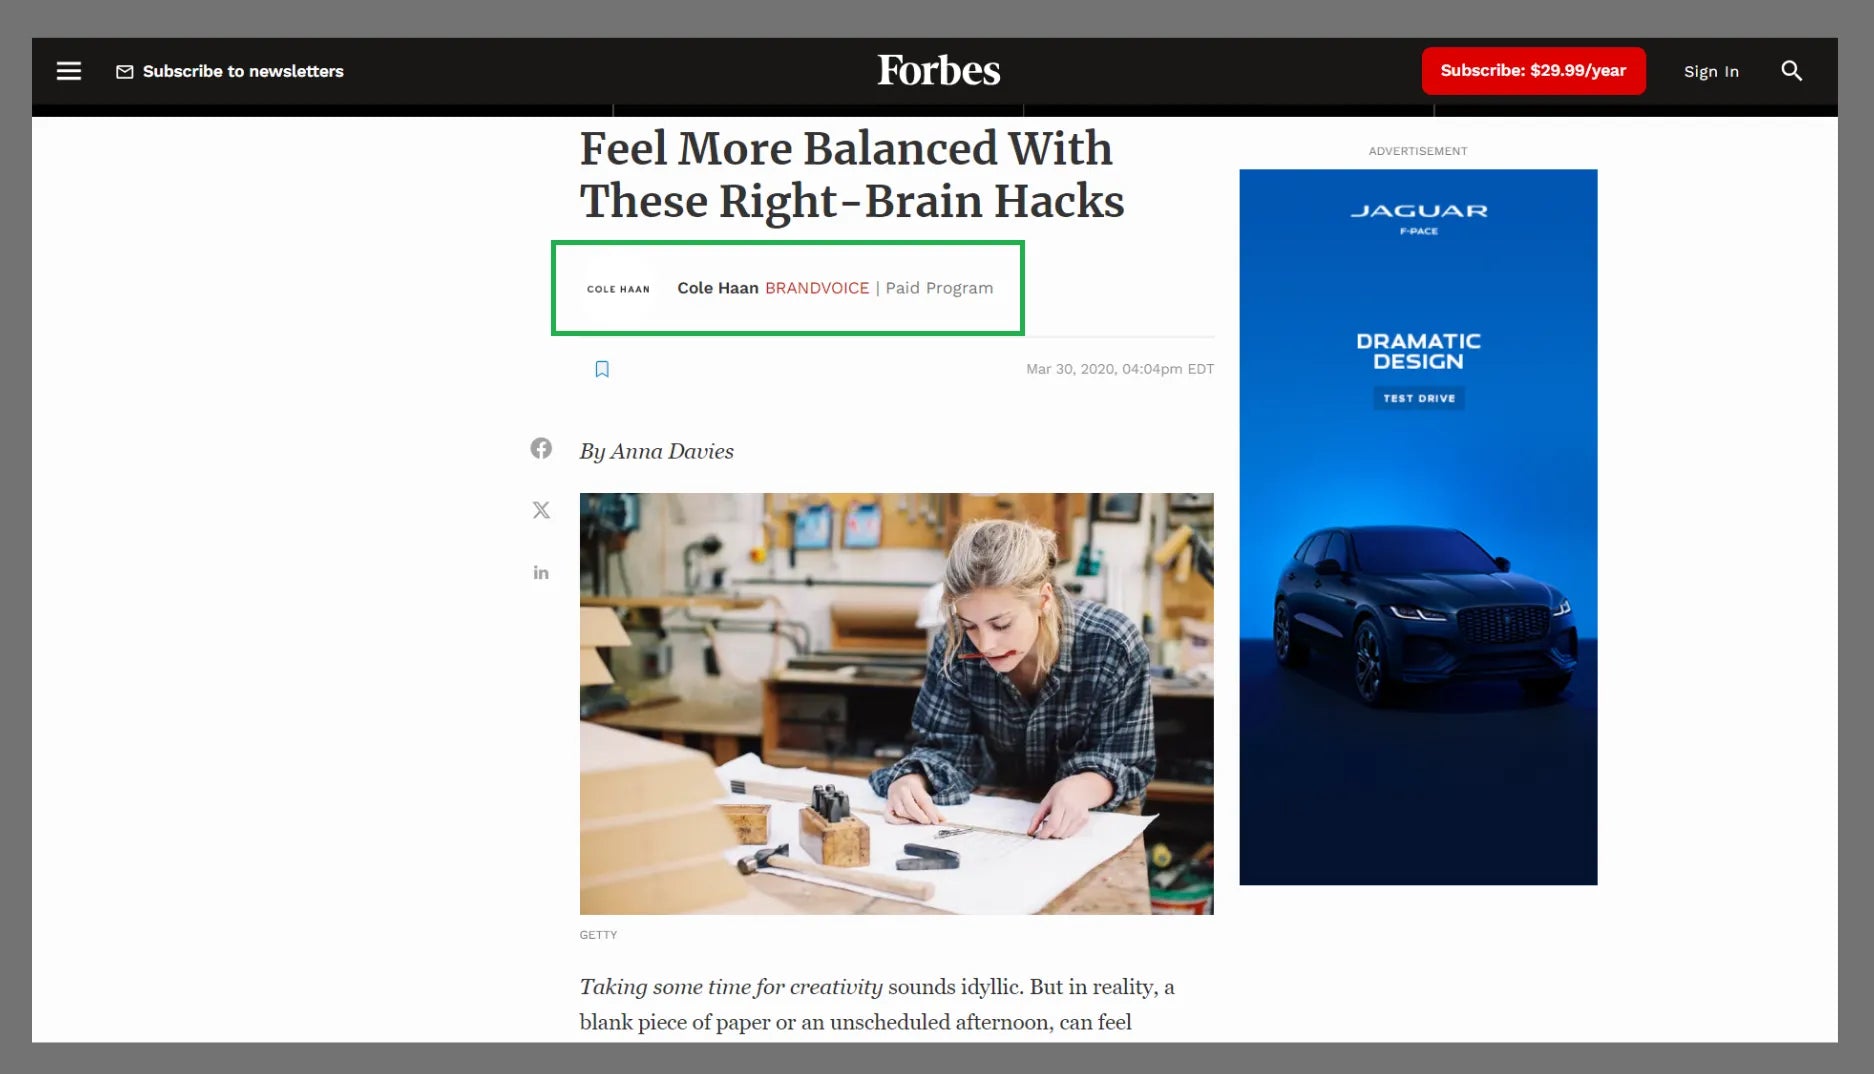 Example of an advertorial on Forbes